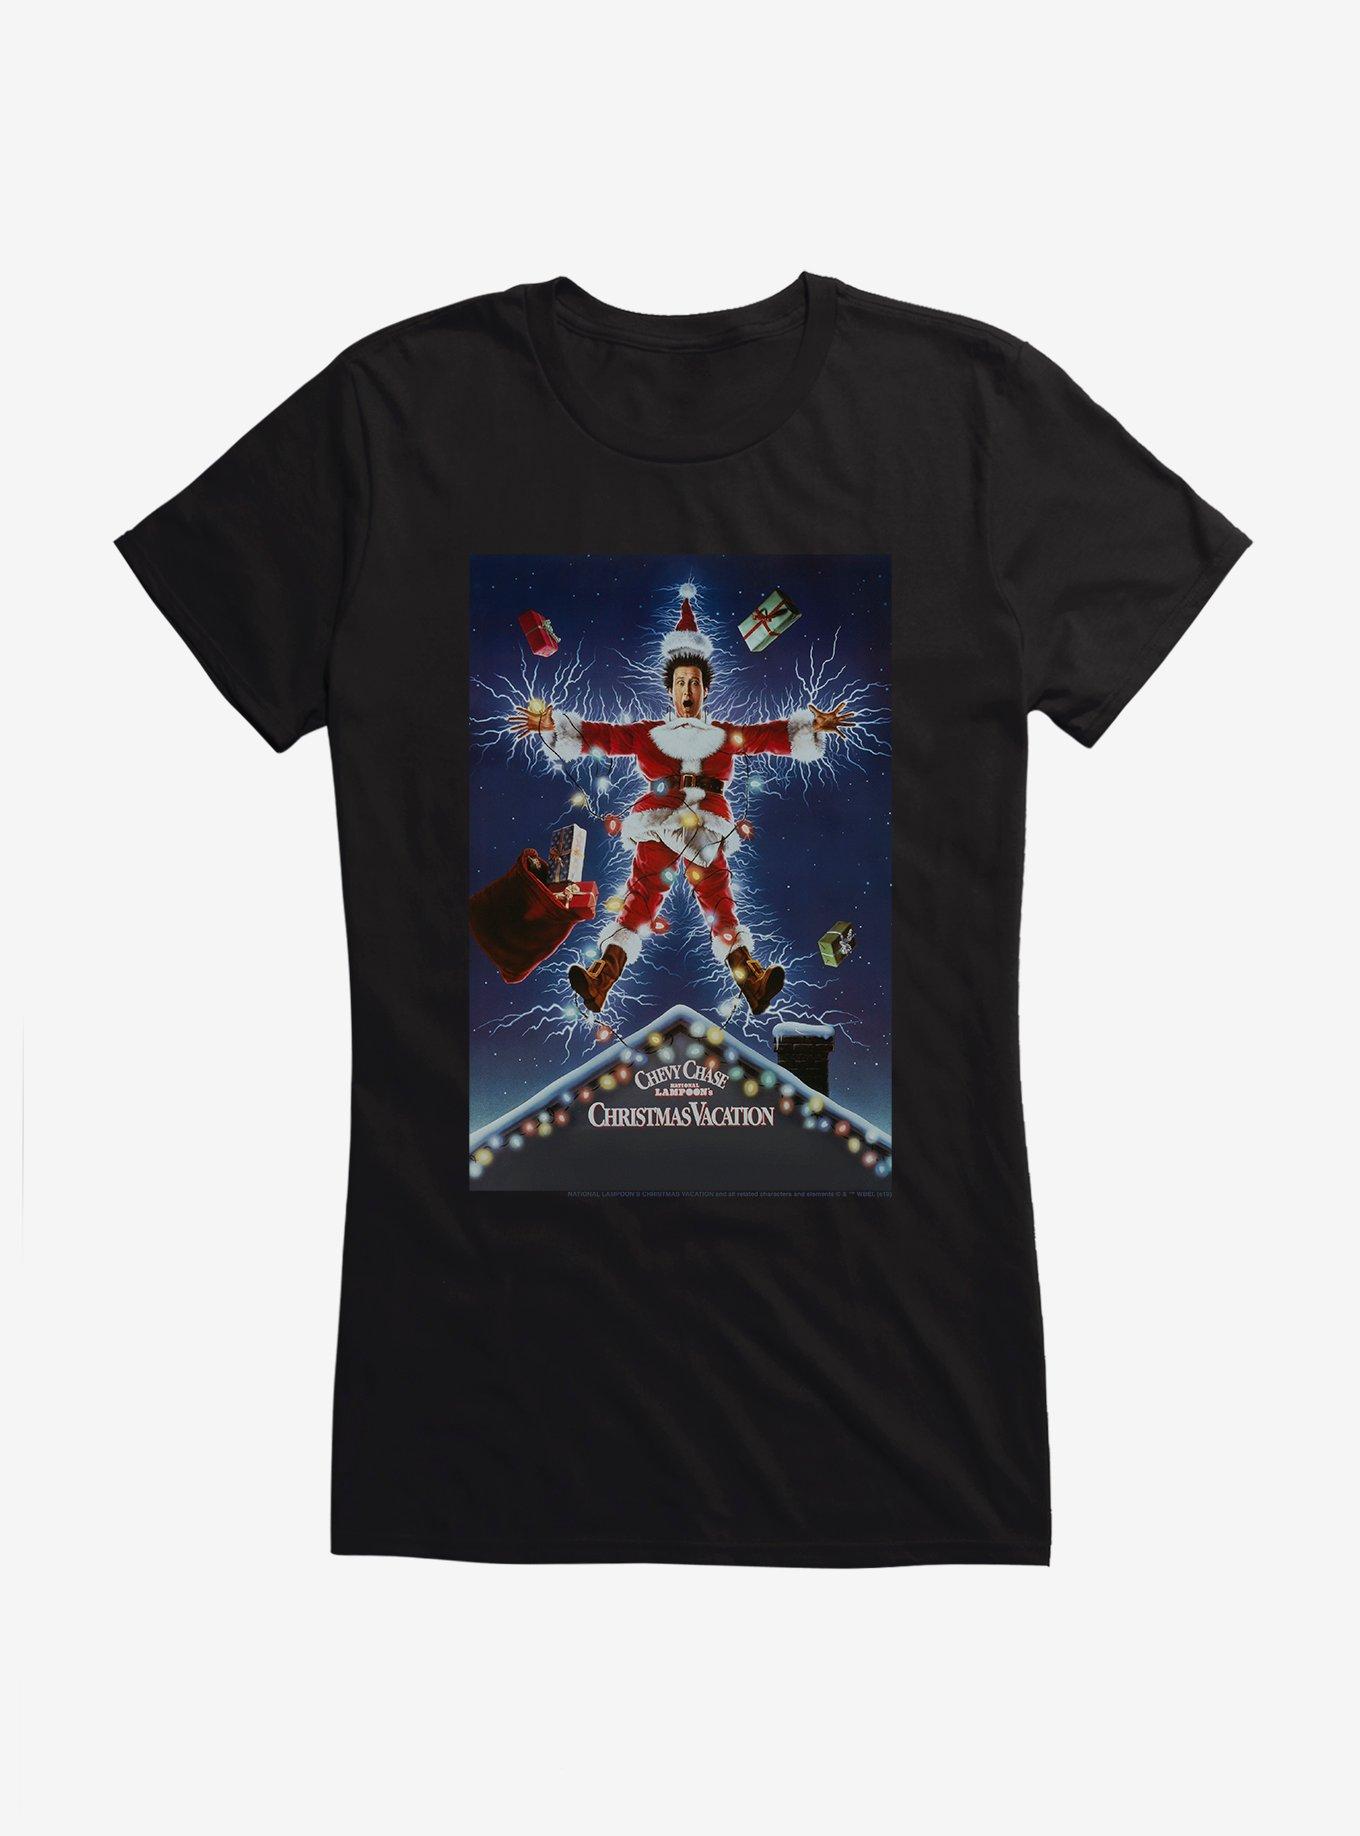 National Lampoon's Christmas Vacation Classic Poster Girls T-Shirt, BLACK, hi-res